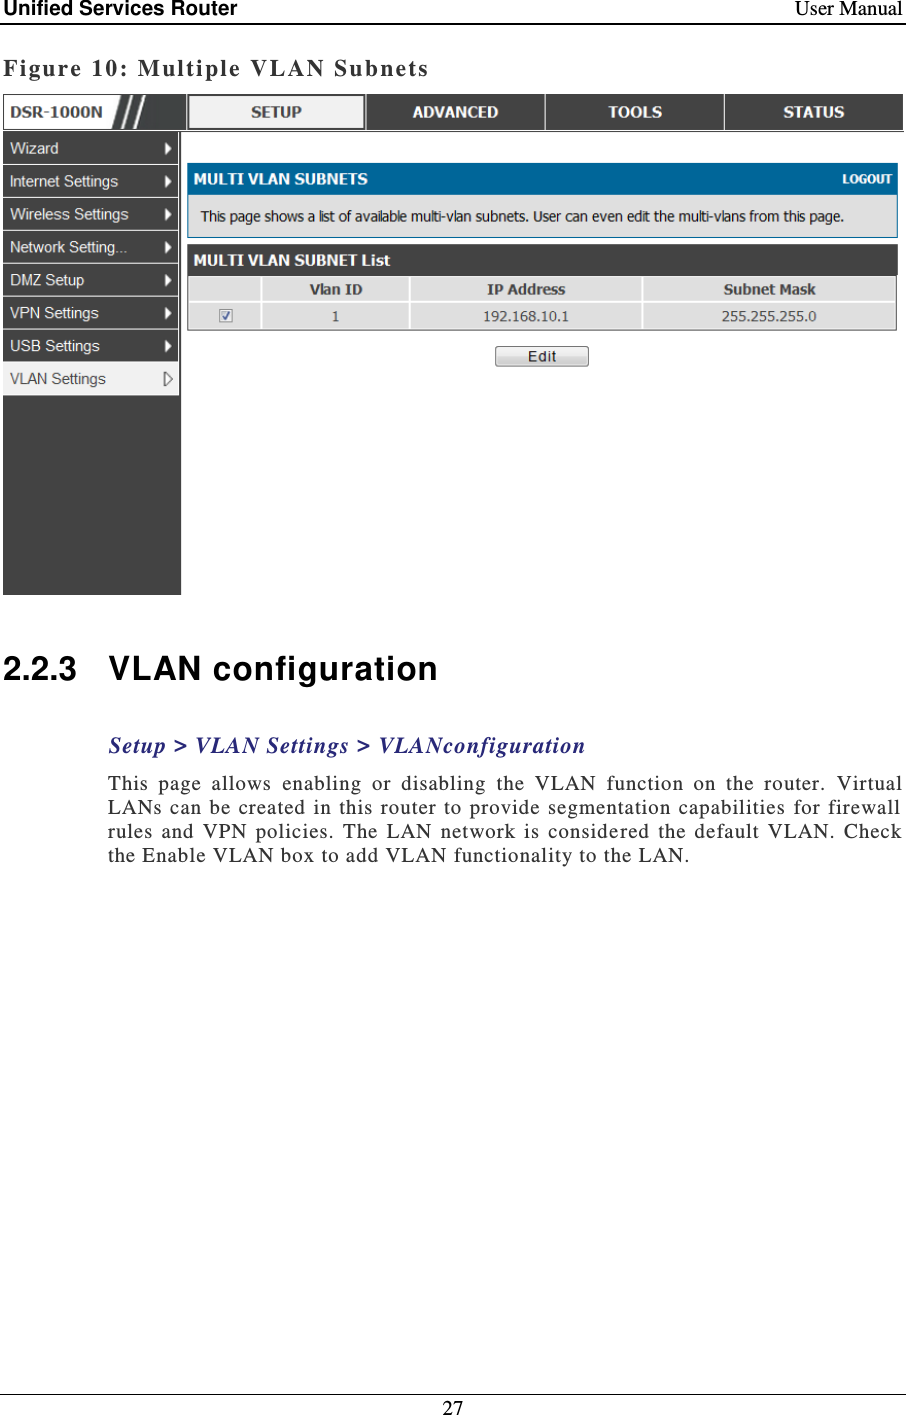 Unified Services Router    User Manual 27  Figure 10: Multi ple  VLAN Subnets    2.2.3  VLAN configuration Setup &gt; VLAN Settings &gt; VLANconfiguration This  page  allows  enabling  or  disabling  the  VLAN  function  on  the  router.  Virtual LANs can be  created  in  this  router  to provide  segmentation  capabilities  for  firewall rules  and  VPN  policies.  The  LAN  network  is  considered  the  default  VLAN.  Check the Enable VLAN box to add VLAN functionality to the LAN.    